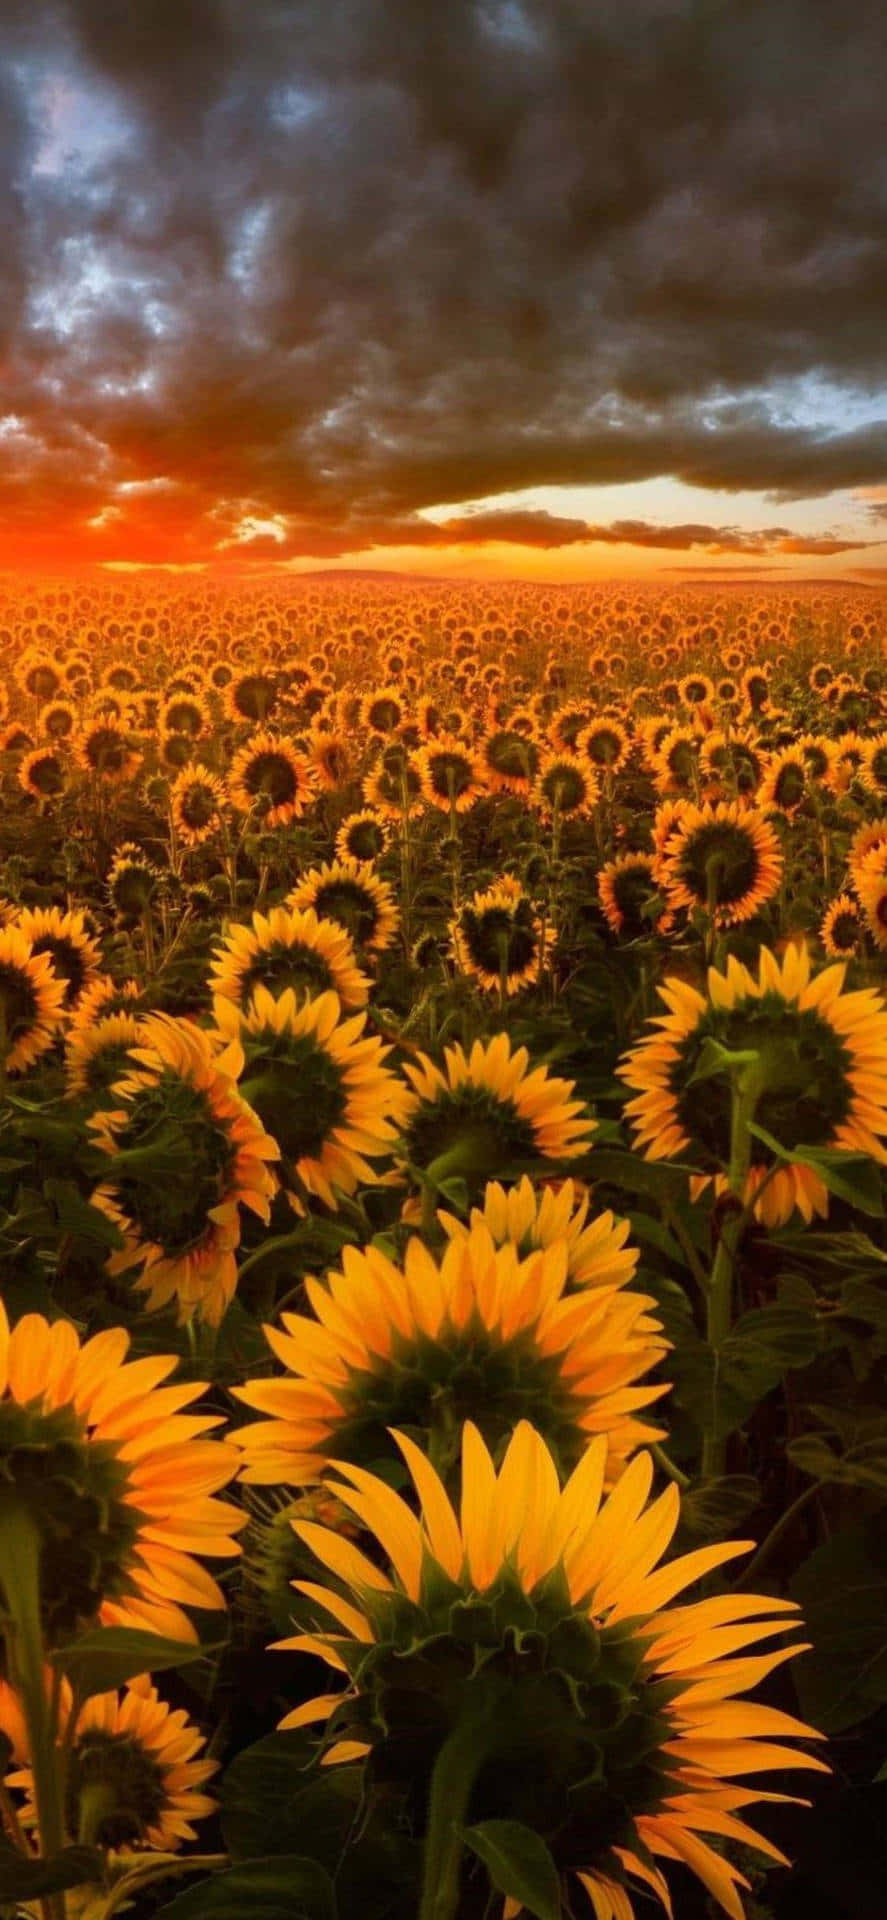 Red Sun With A Sunflower Aesthetic Iphone Wallpaper